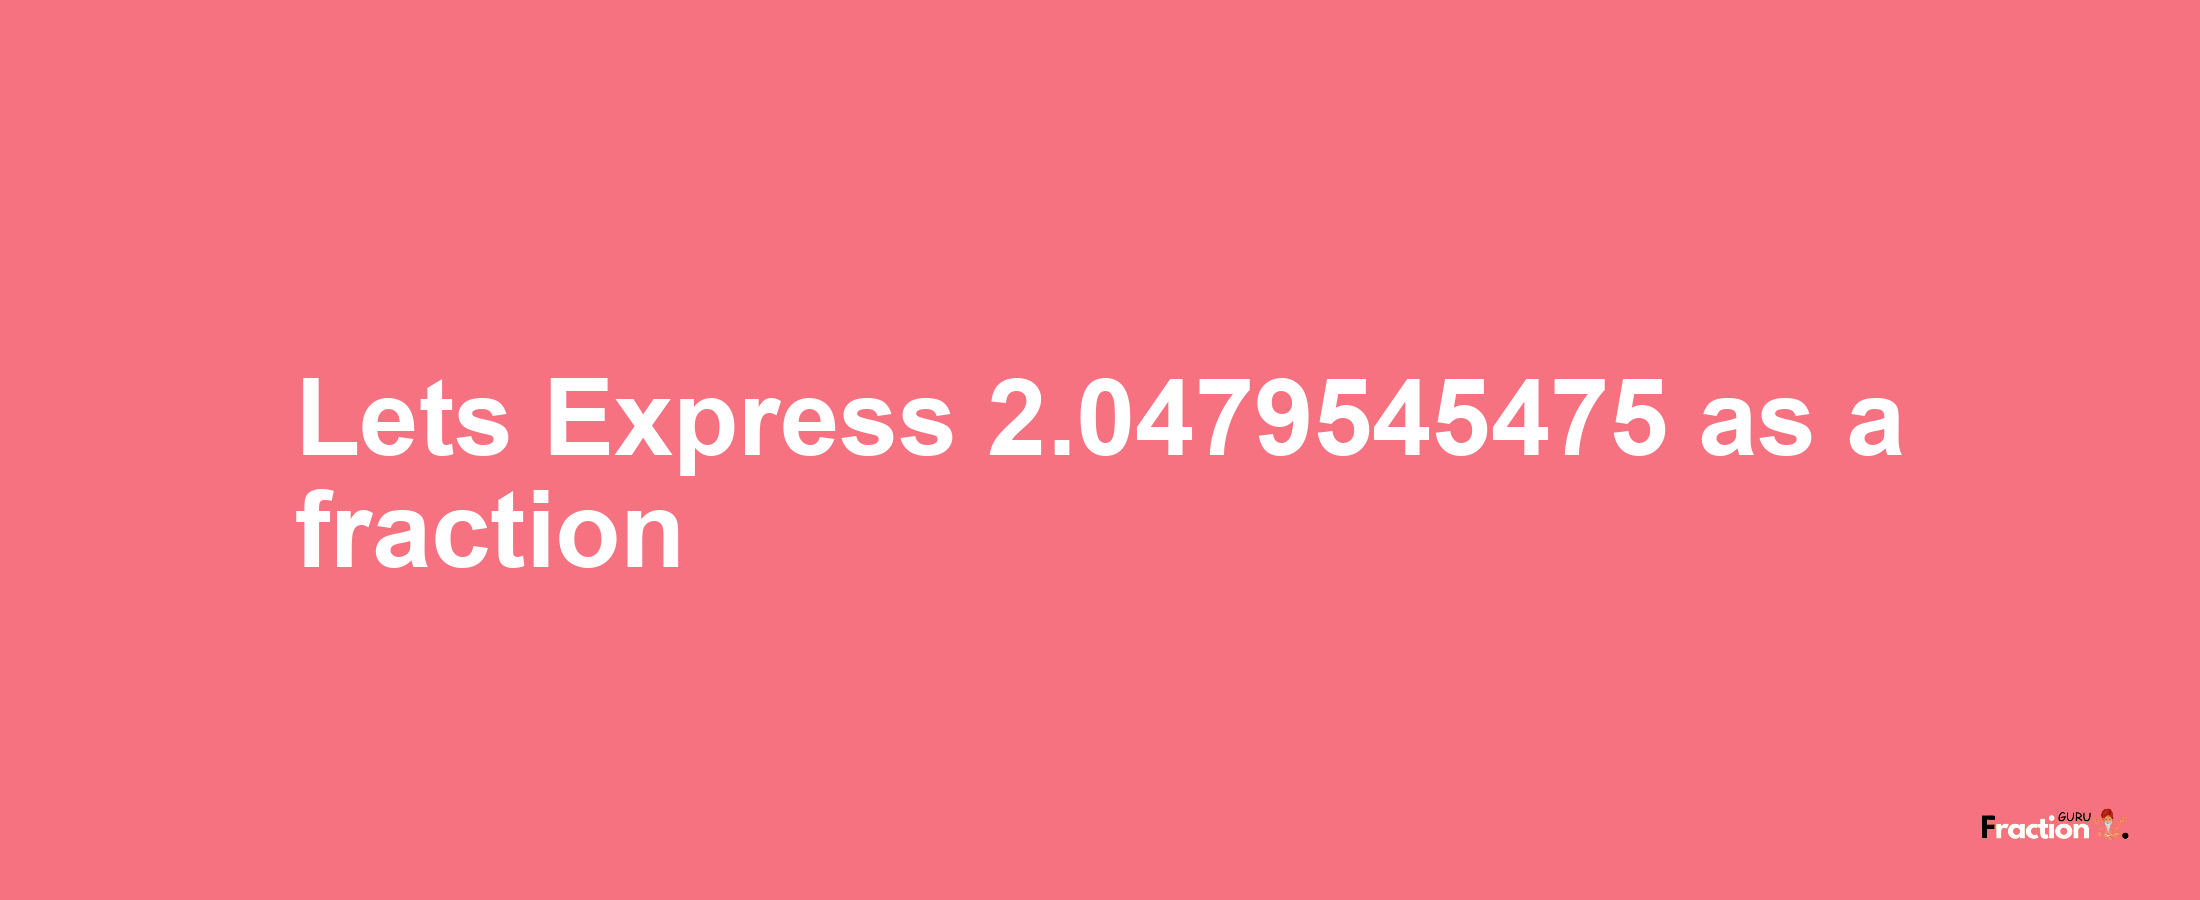 Lets Express 2.0479545475 as afraction